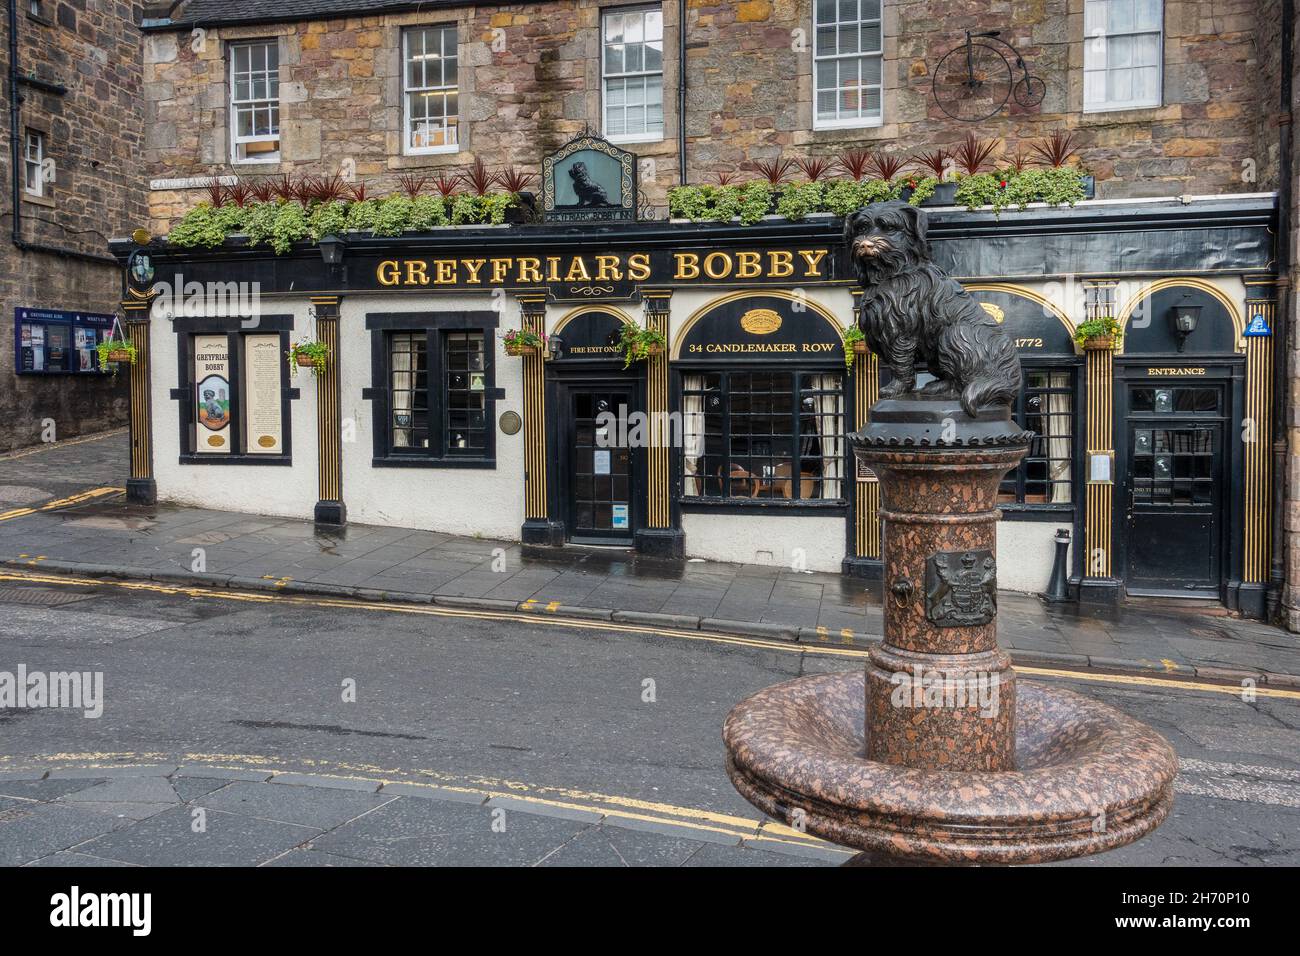 The Greyfriars Bobby Pub und Statue of Greyfriars Bobby on A Water Fountain in Candlemaker Row Edinburgh, Schottland Stockfoto